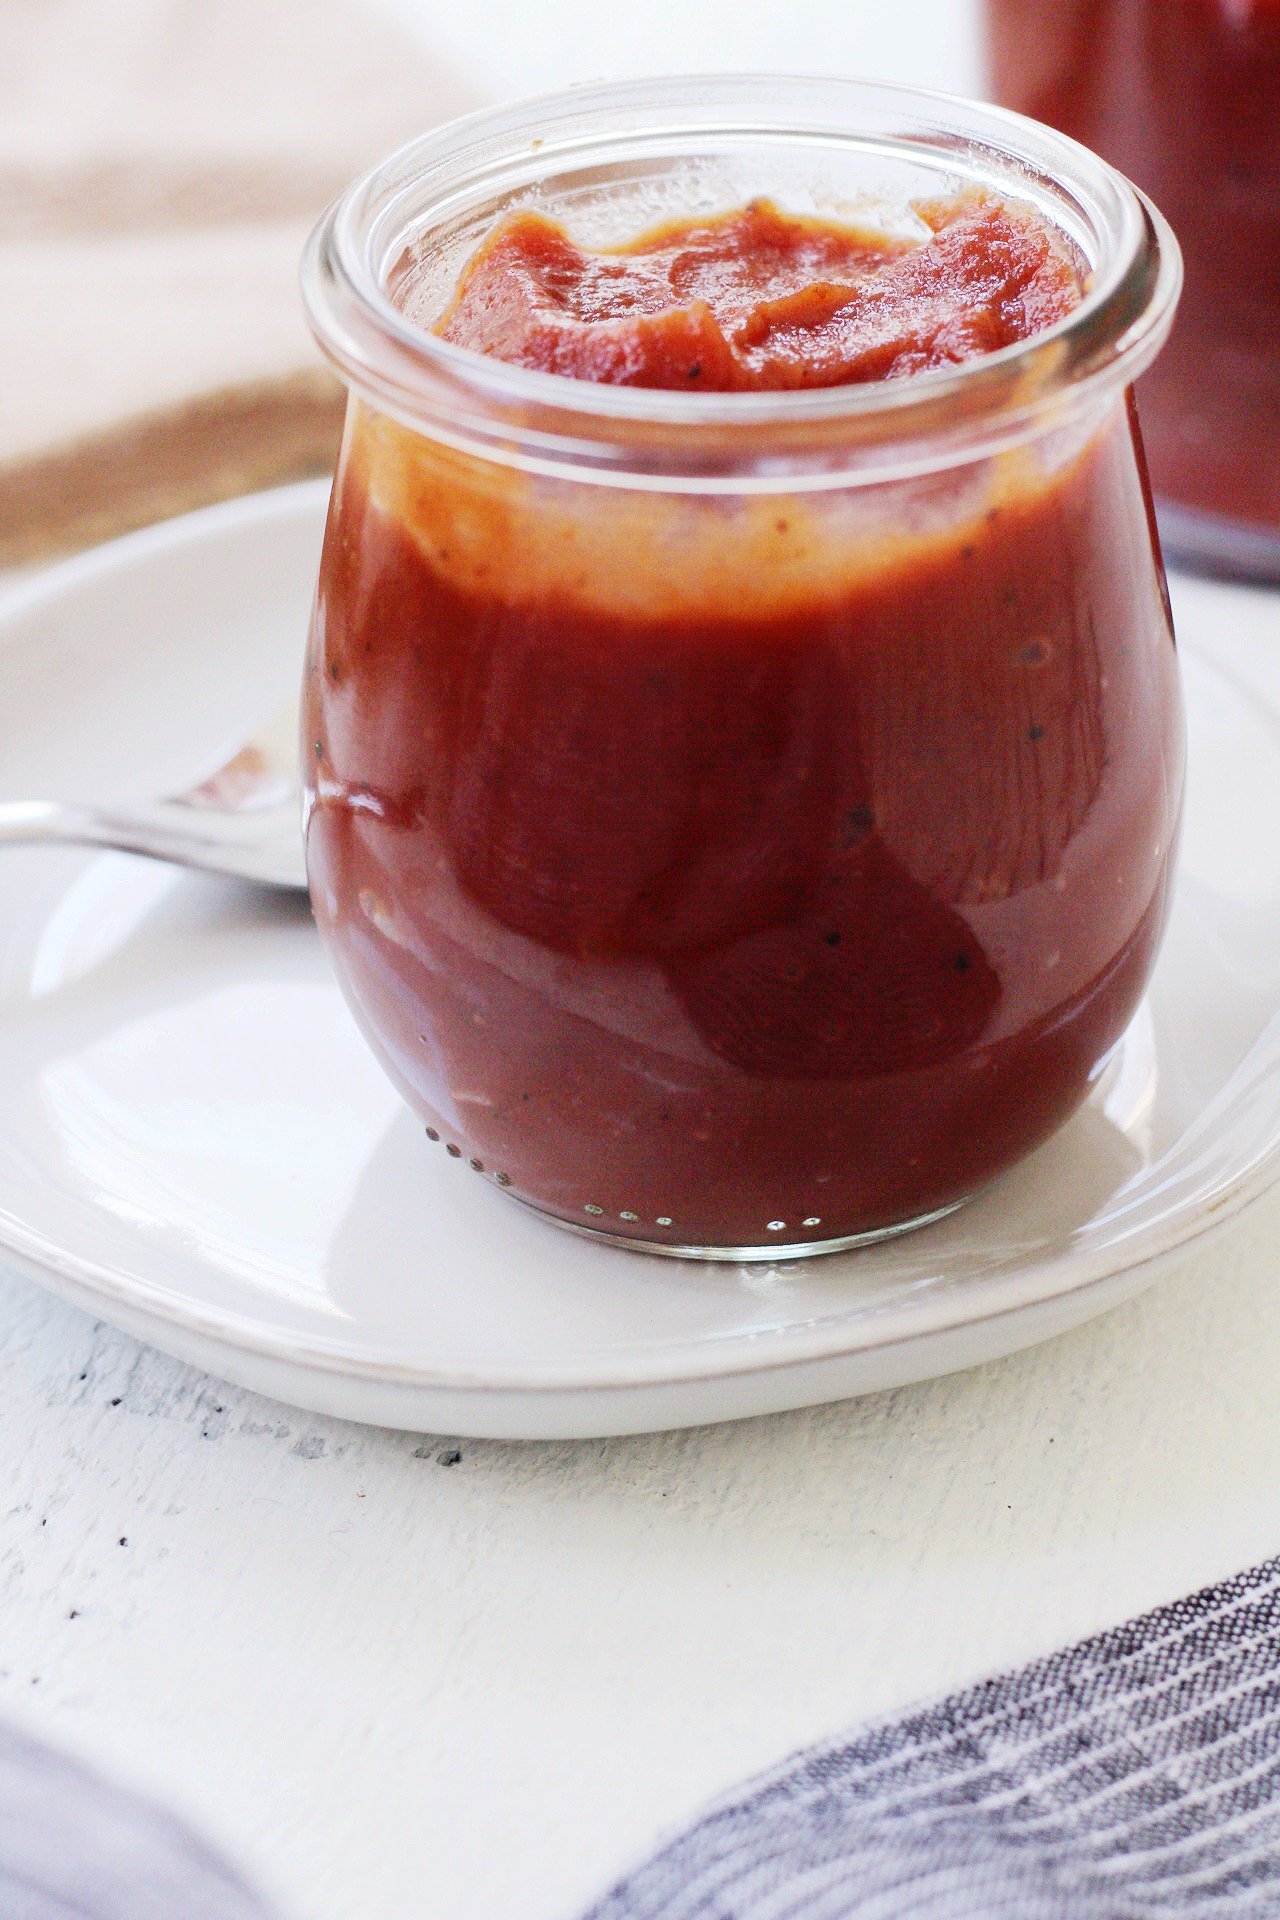 Whole30 BBQ sauce is an easy condiment to whip up in your own kitchen. The paleo BBQ is also vegan and 100% a sugar free BBQ option! It's great to keep around for pulled pork, BBQ grilled chicken, ribs, you name it! #paleobbqsauce #whole30bbqsauce #sugarfreebbq